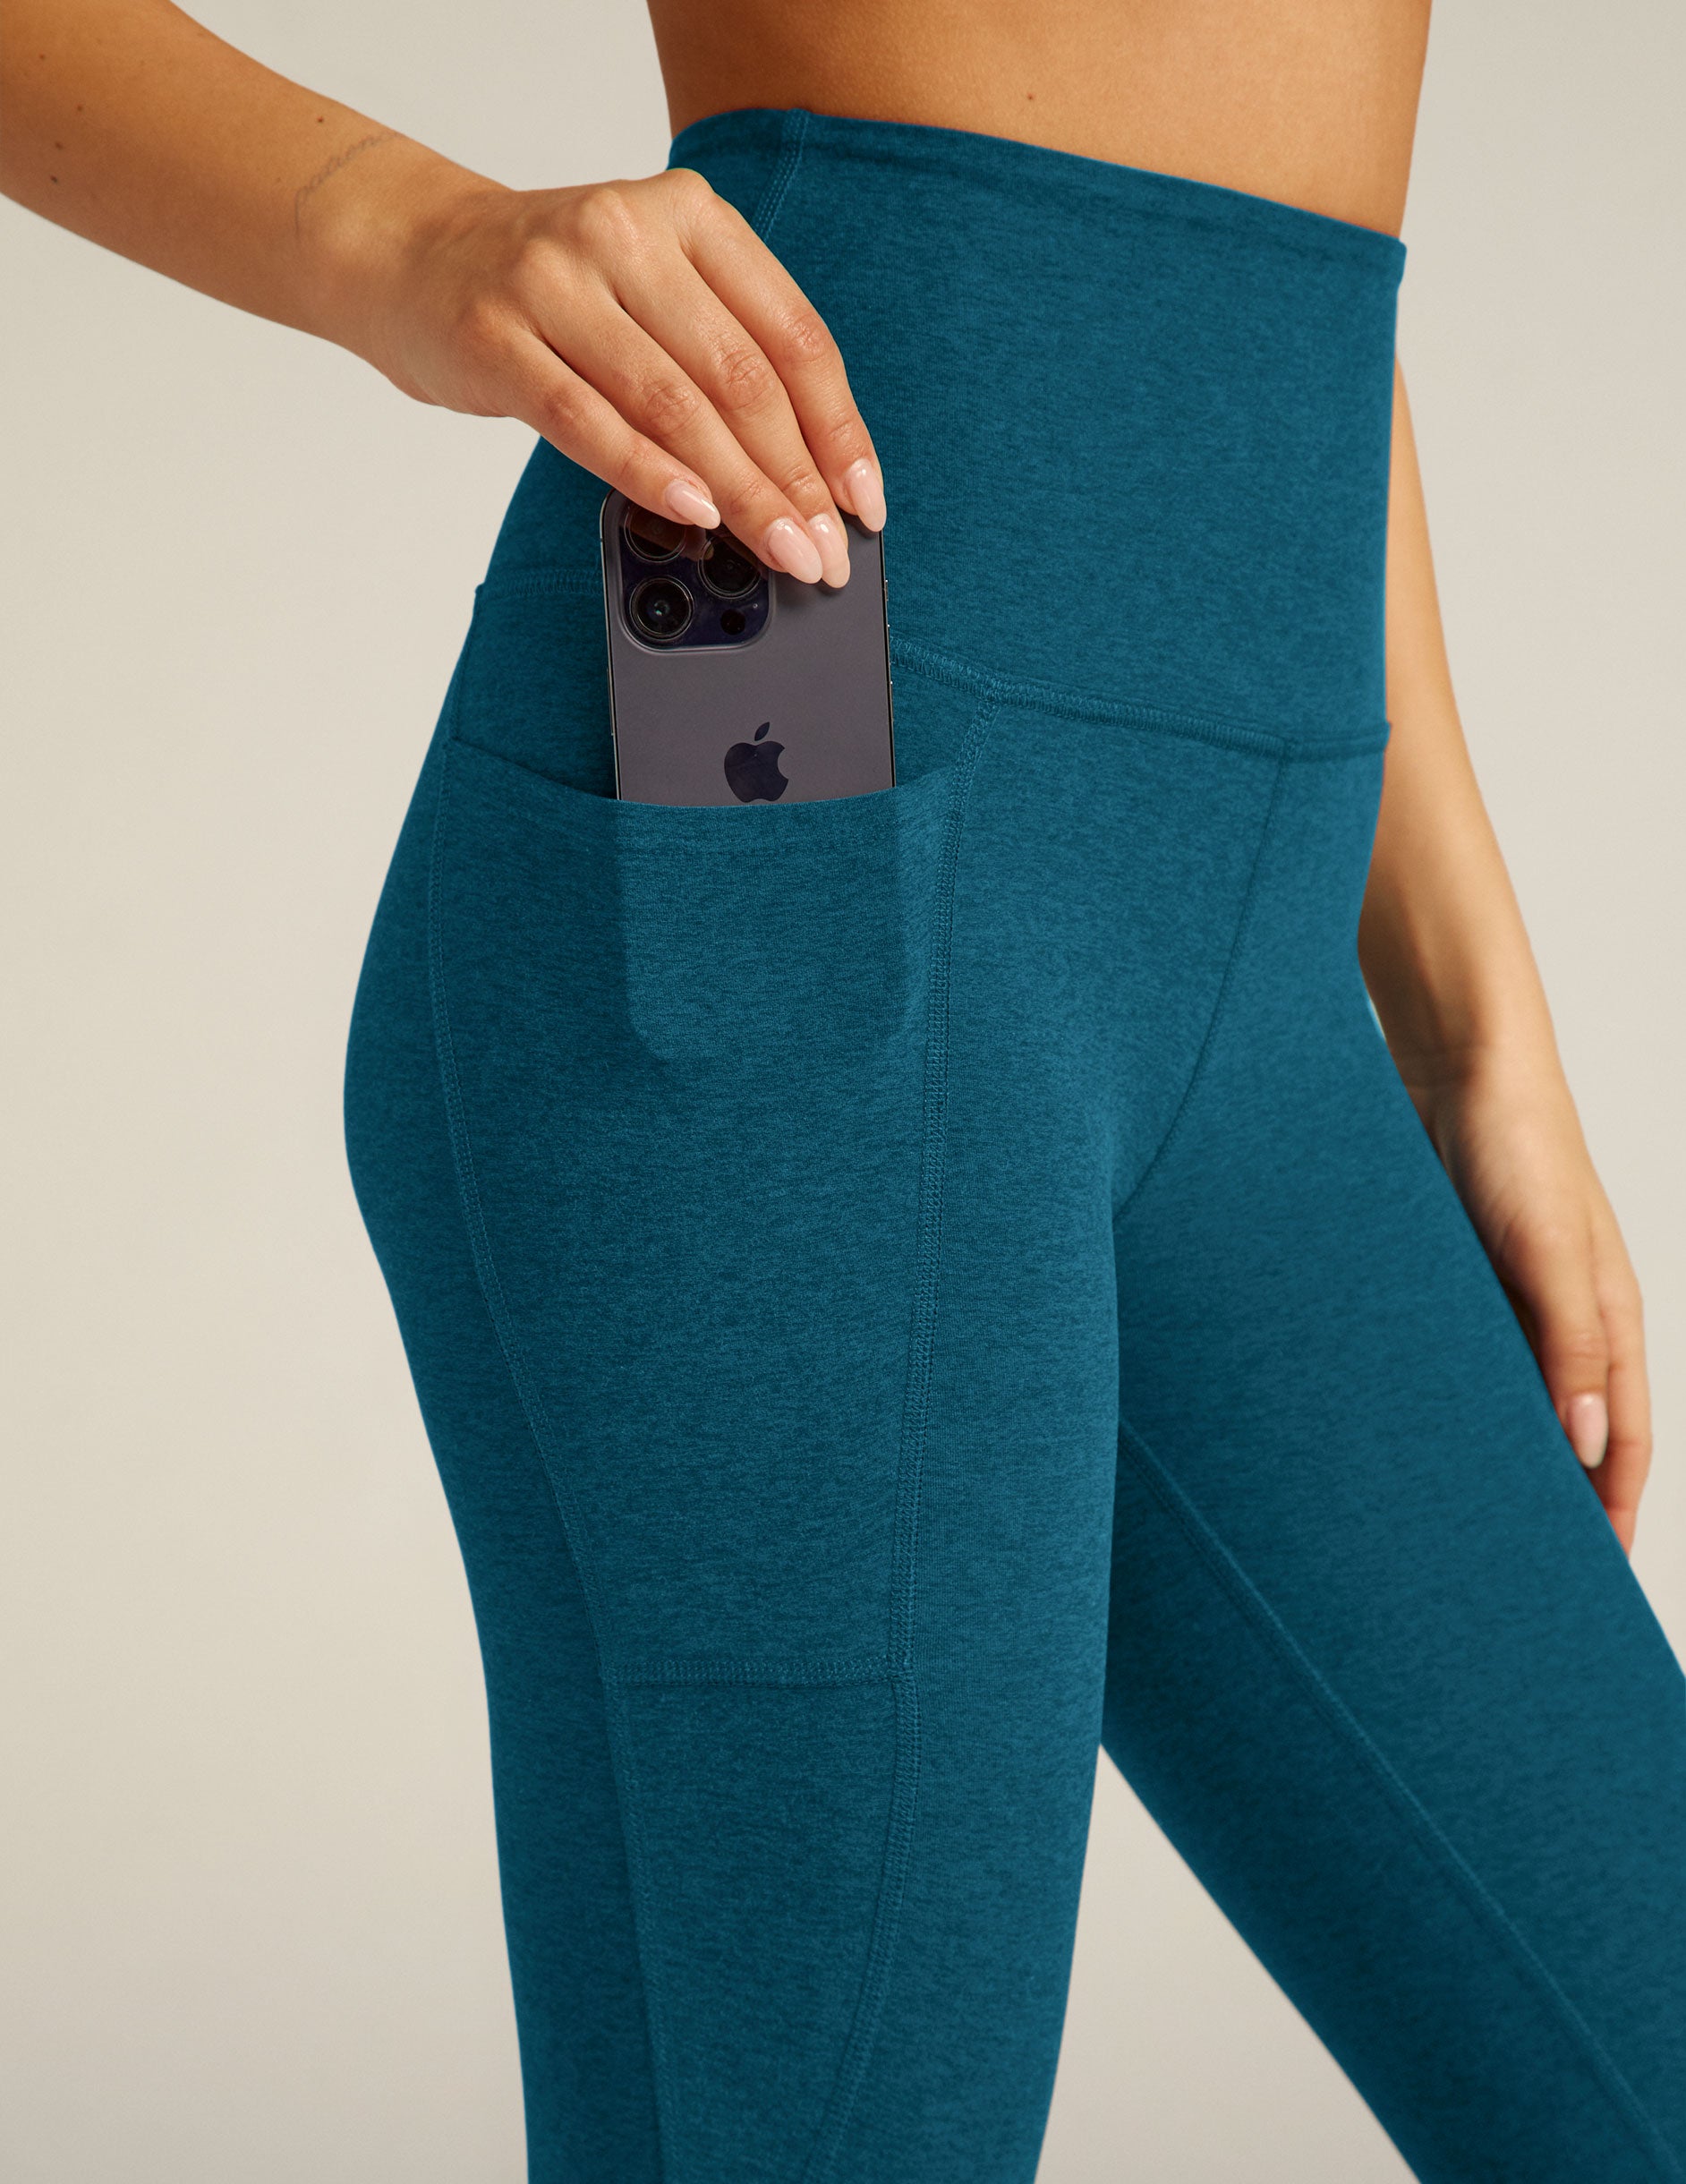 BEYOND YOGA HIGH WAISTED MIDI LEGGING - FIG HEATHER SD3243 – Work It Out